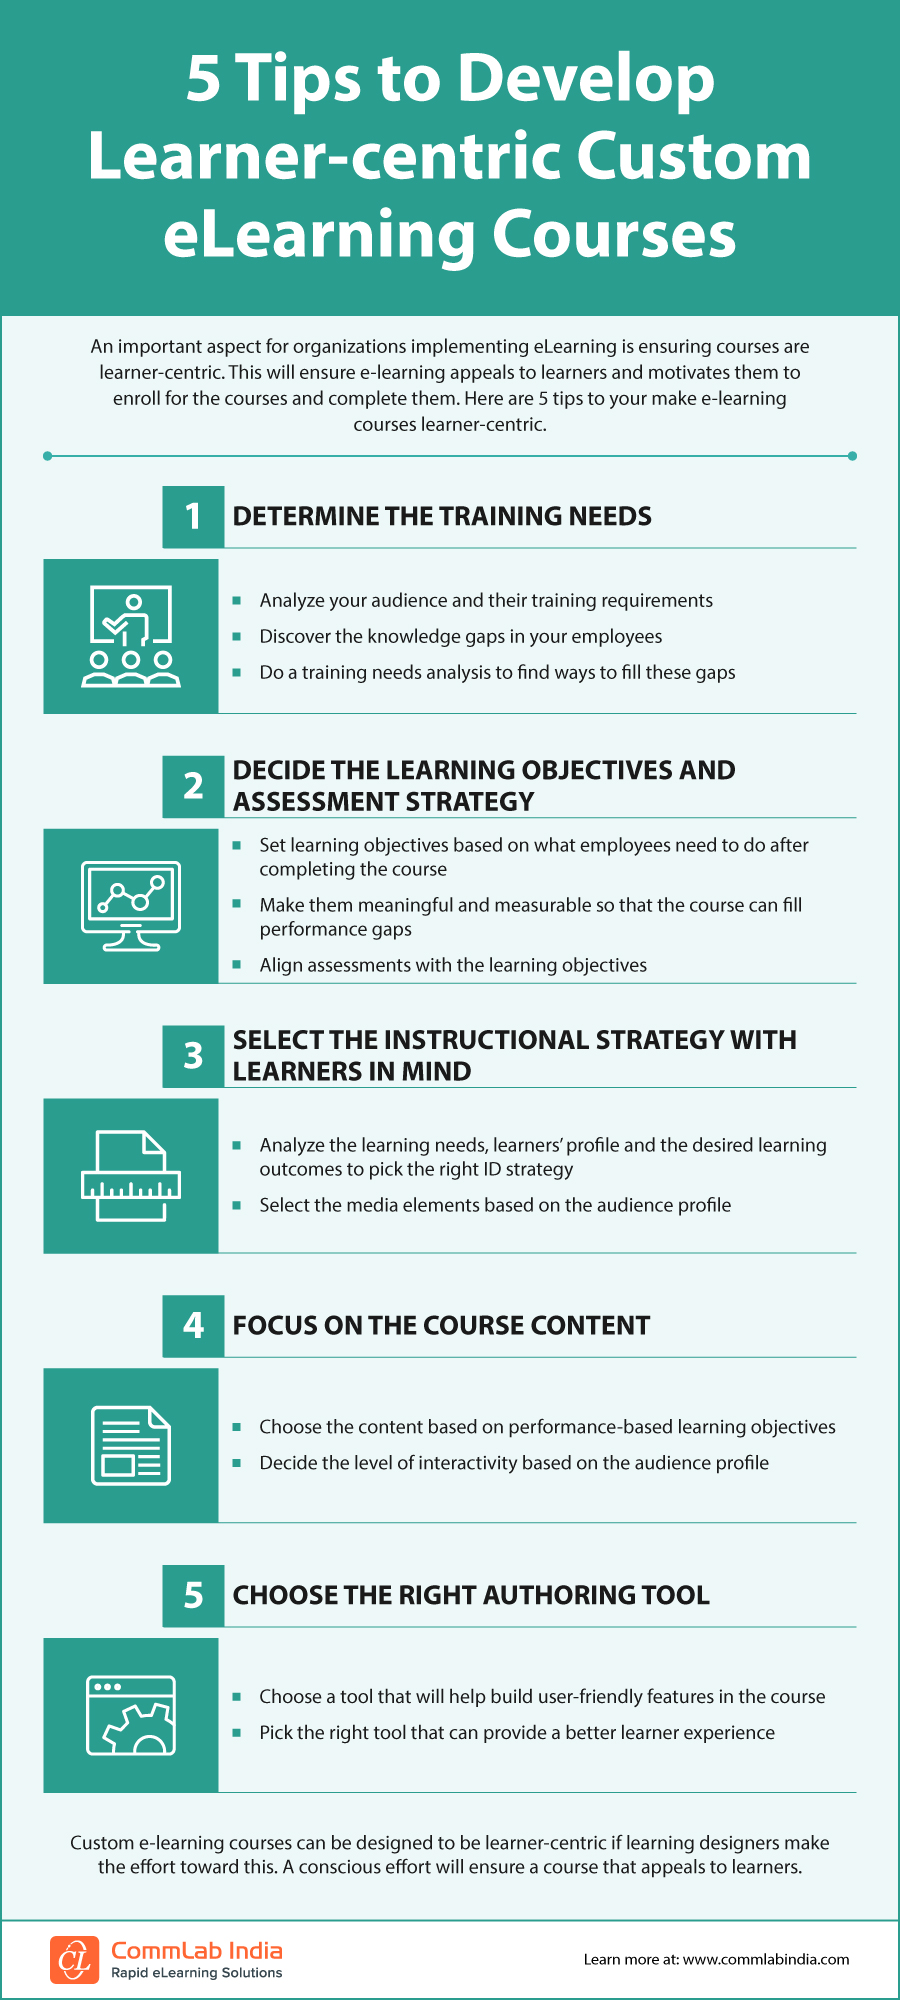 5 Tips to Develop Learner-centric Custom E-learning Courses [Infographic]